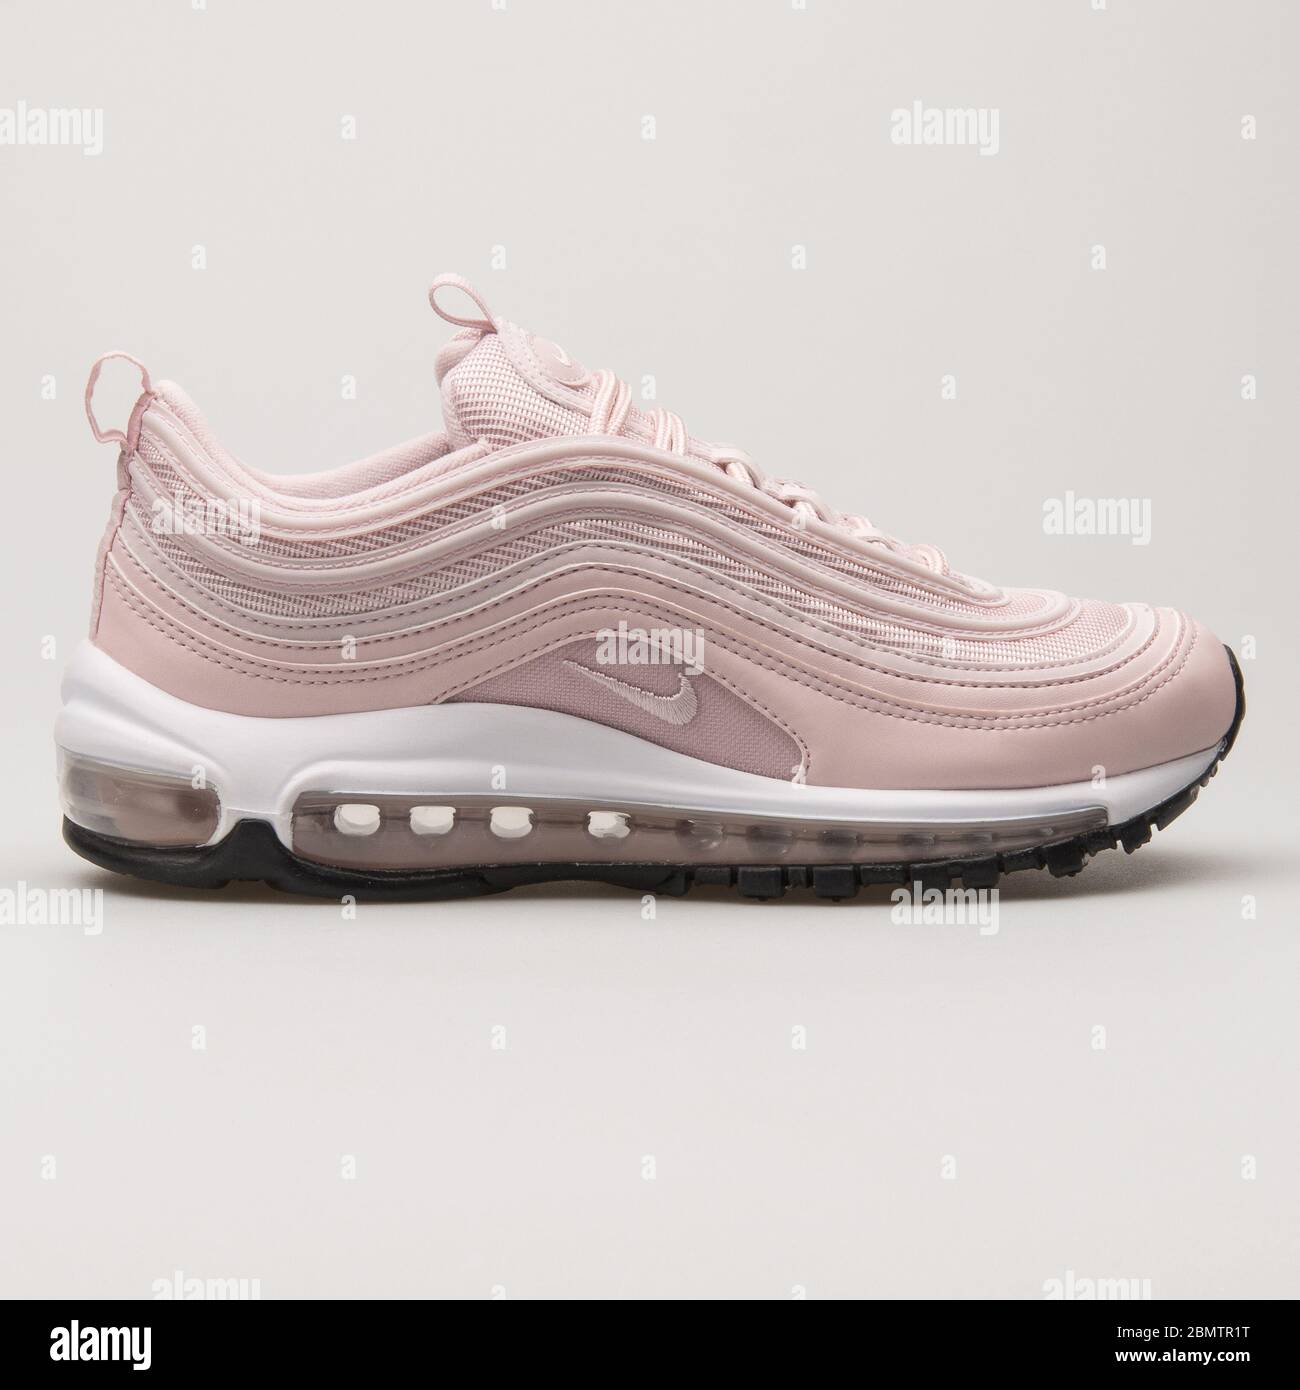 AUSTRIA - MAY 27, Nike Air Max 97 rose and white sneaker on white background Stock Photo - Alamy